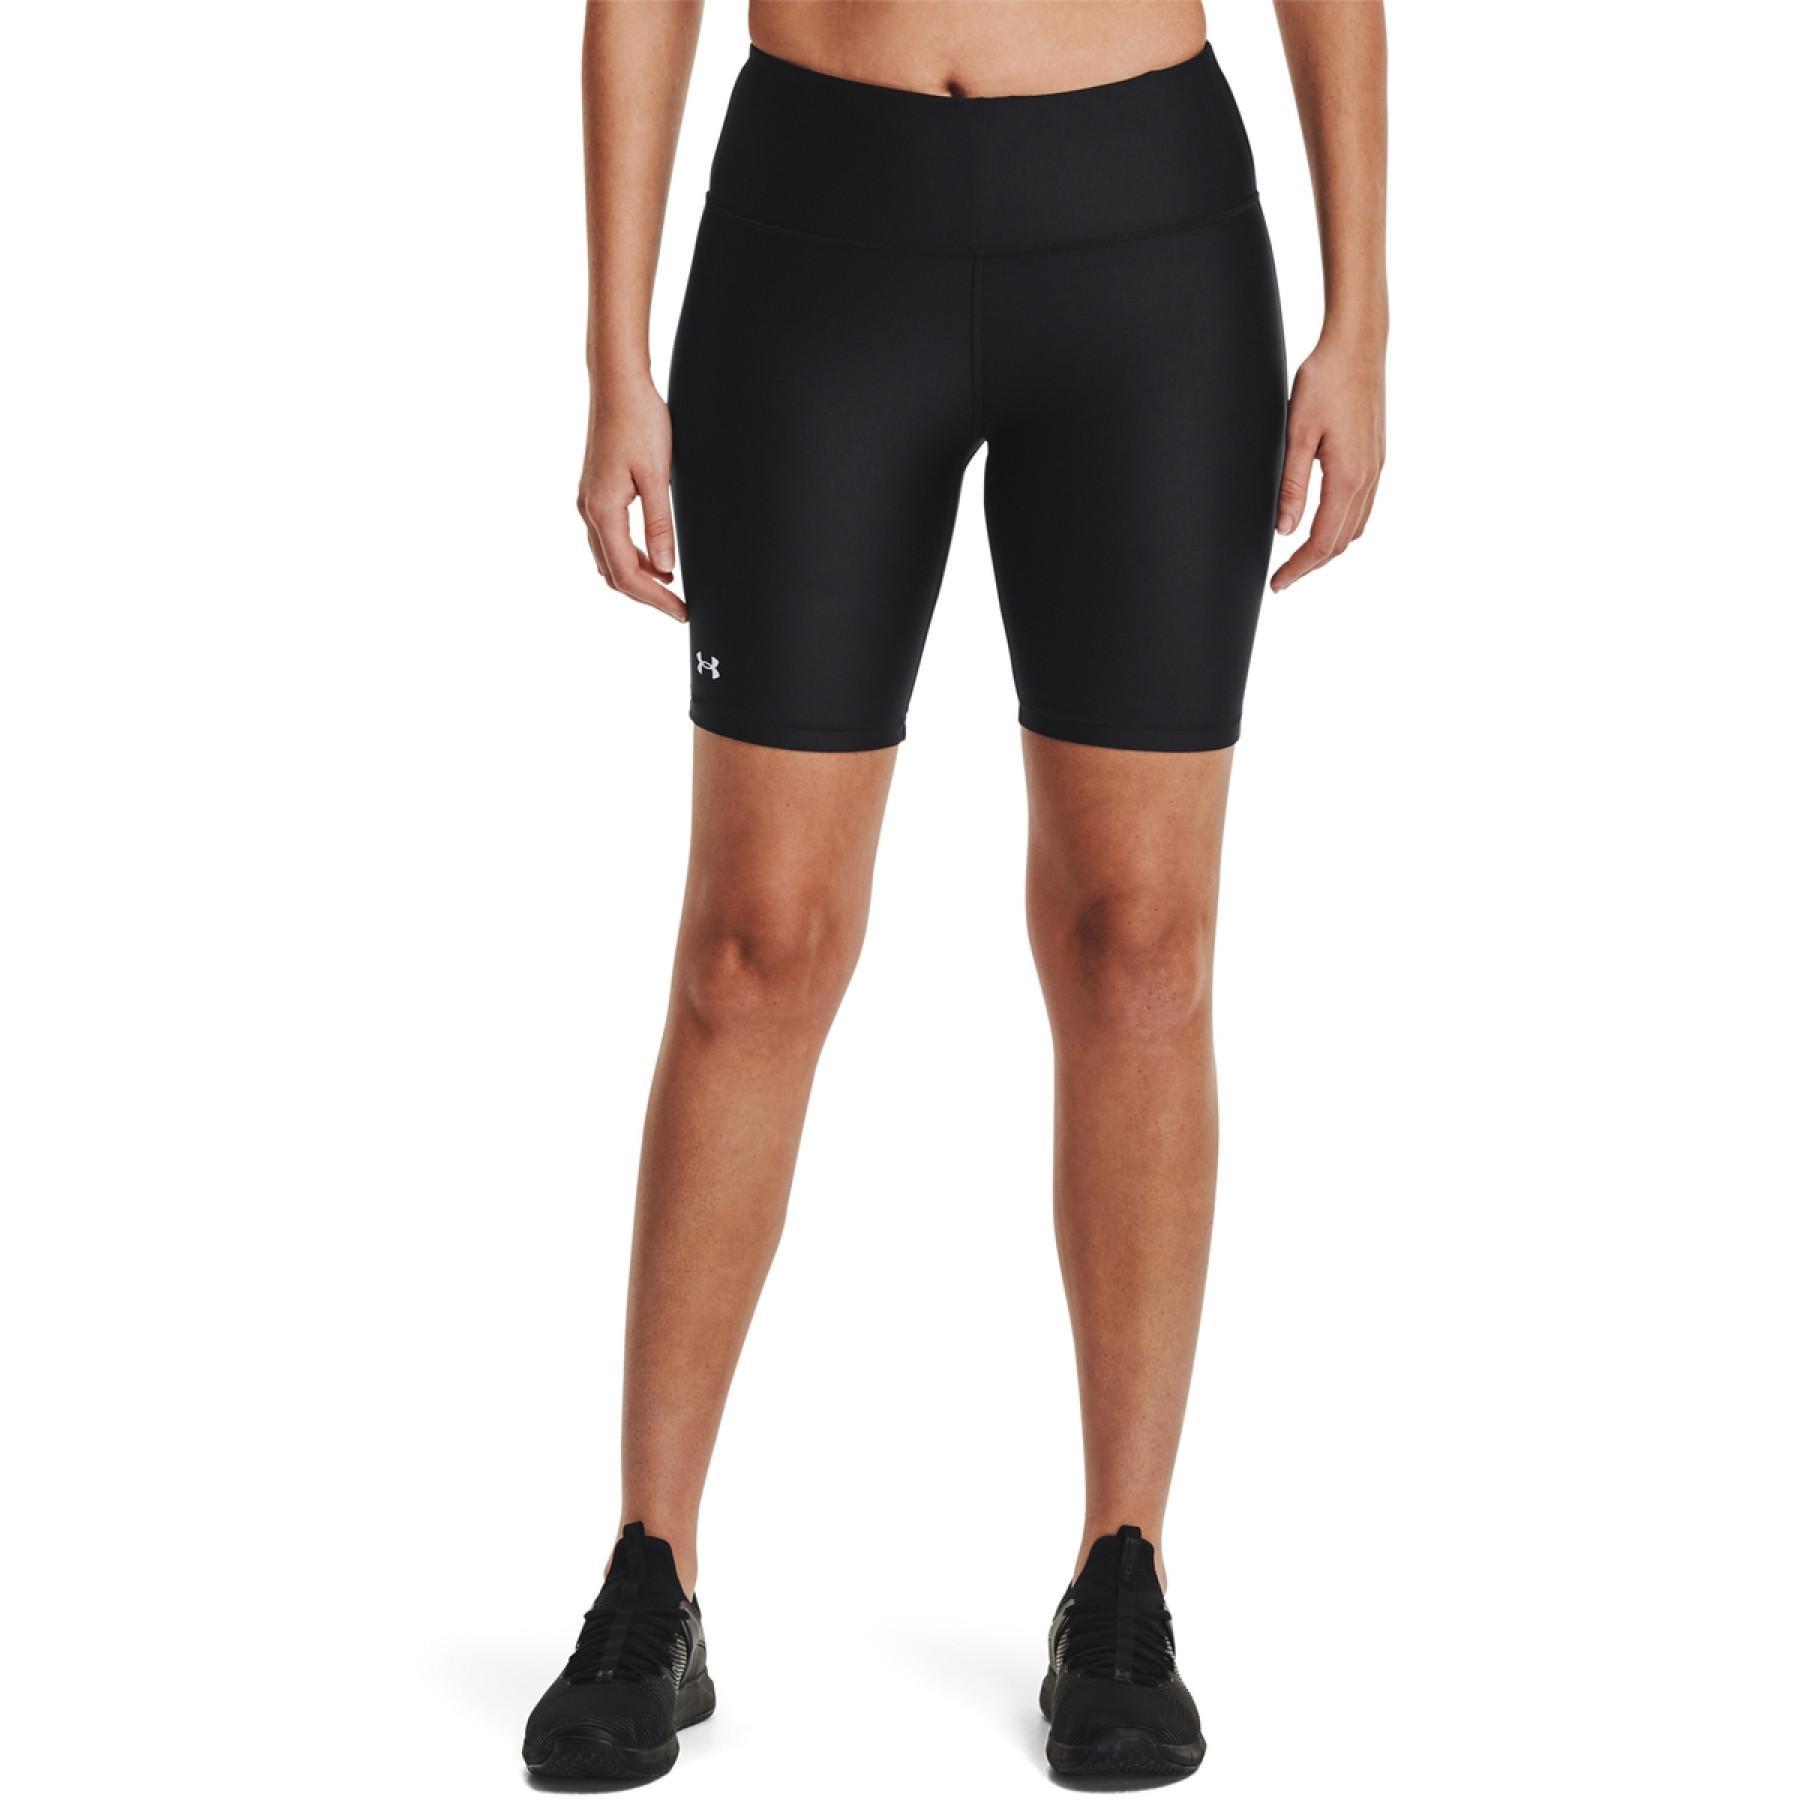 Women's cycling shorts Under Armour